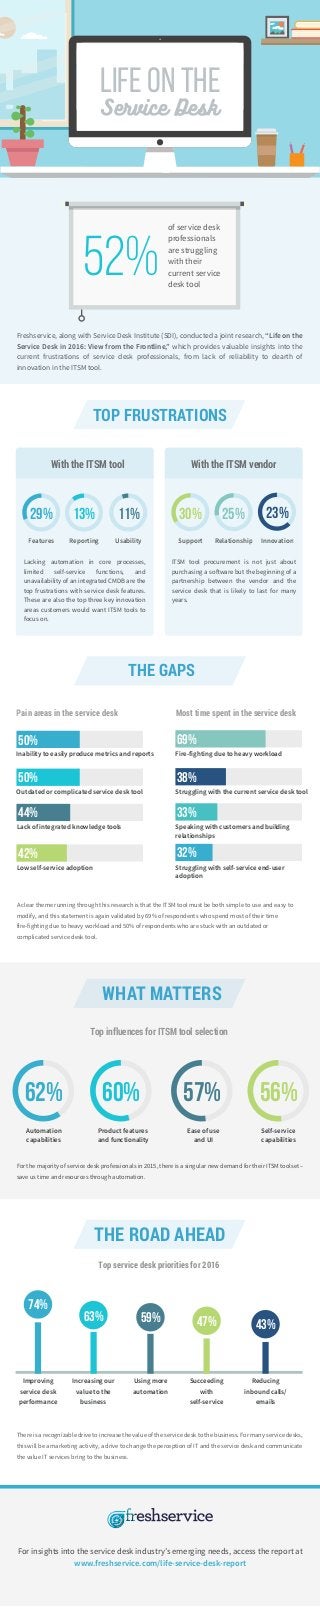 THE GAPS
THE ROAD AHEAD
52%
of service desk
professionals
are struggling
with their
current service
desk tool
Inability to easily produce metrics and reports
38%Outdated or complicated service desk tool
Lack of integrated knowledge tools
Low self-service adoption
50%
50%
44%
42%
Fire-fighting due to heavy workload
38%Struggling with the current service desk tool
Speaking with customers and building
relationships
Struggling with self-service end-user
adoption
69%
38%
33%
32%
Pain areas in the service desk Most time spent in the service desk
A clear theme running through this research is that the ITSM tool must be both simple to use and easy to
modify, and this statement is again validated by 69% of respondents who spend most of their time
fire-fighting due to heavy workload and 50% of respondents who are stuck with an outdated or
complicated service desk tool.
Top influences for ITSM tool selection
For the majority of service desk professionals in 2015, there is a singular new demand for their ITSM toolset –
save us time and resources through automation.
There is a recognizable drive to increase the value of the service desk to the business. For many service desks,
this will be a marketing activity, a drive to change the perception of IT and the service desk and communicate
the value IT services bring to the business.
With the ITSM tool
Lacking automation in core processes,
limited self-service functions, and
unavailability of an integrated CMDB are the
top frustrations with service desk features.
These are also the top three key innovation
areas customers would want ITSM tools to
focus on.
Features Reporting Usability
13%29% 11%
Innovation
With the ITSM vendor
ITSM tool procurement is not just about
purchasing a software but the beginning of a
partnership between the vendor and the
service desk that is likely to last for many
years.
Support Relationship
30% 25% 23%
Freshservice, along with Service Desk Institute (SDI), conducted a joint research, “Life on the
Service Desk in 2016: View from the Frontline,” which provides valuable insights into the
current frustrations of service desk professionals, from lack of reliability to dearth of
innovation in the ITSM tool.
For insights into the service desk industry’s emerging needs, access the report at
TOP FRUSTRATIONS
WHAT MATTERS
62% 60% 57%
Self-service
capabilities
Ease of use
and UI
Product features
and functionality
Automation
capabilities
56%
Life on the
Service Desk
Top service desk priorities for 2016
74%
63% 47% 43%
Improving
service desk
performance
Increasing our
value to the
business
Using more
automation
Succeeding
with
self-service
Reducing
inbound calls/
emails
59%
www.freshservice.com/life-service-desk-report
 